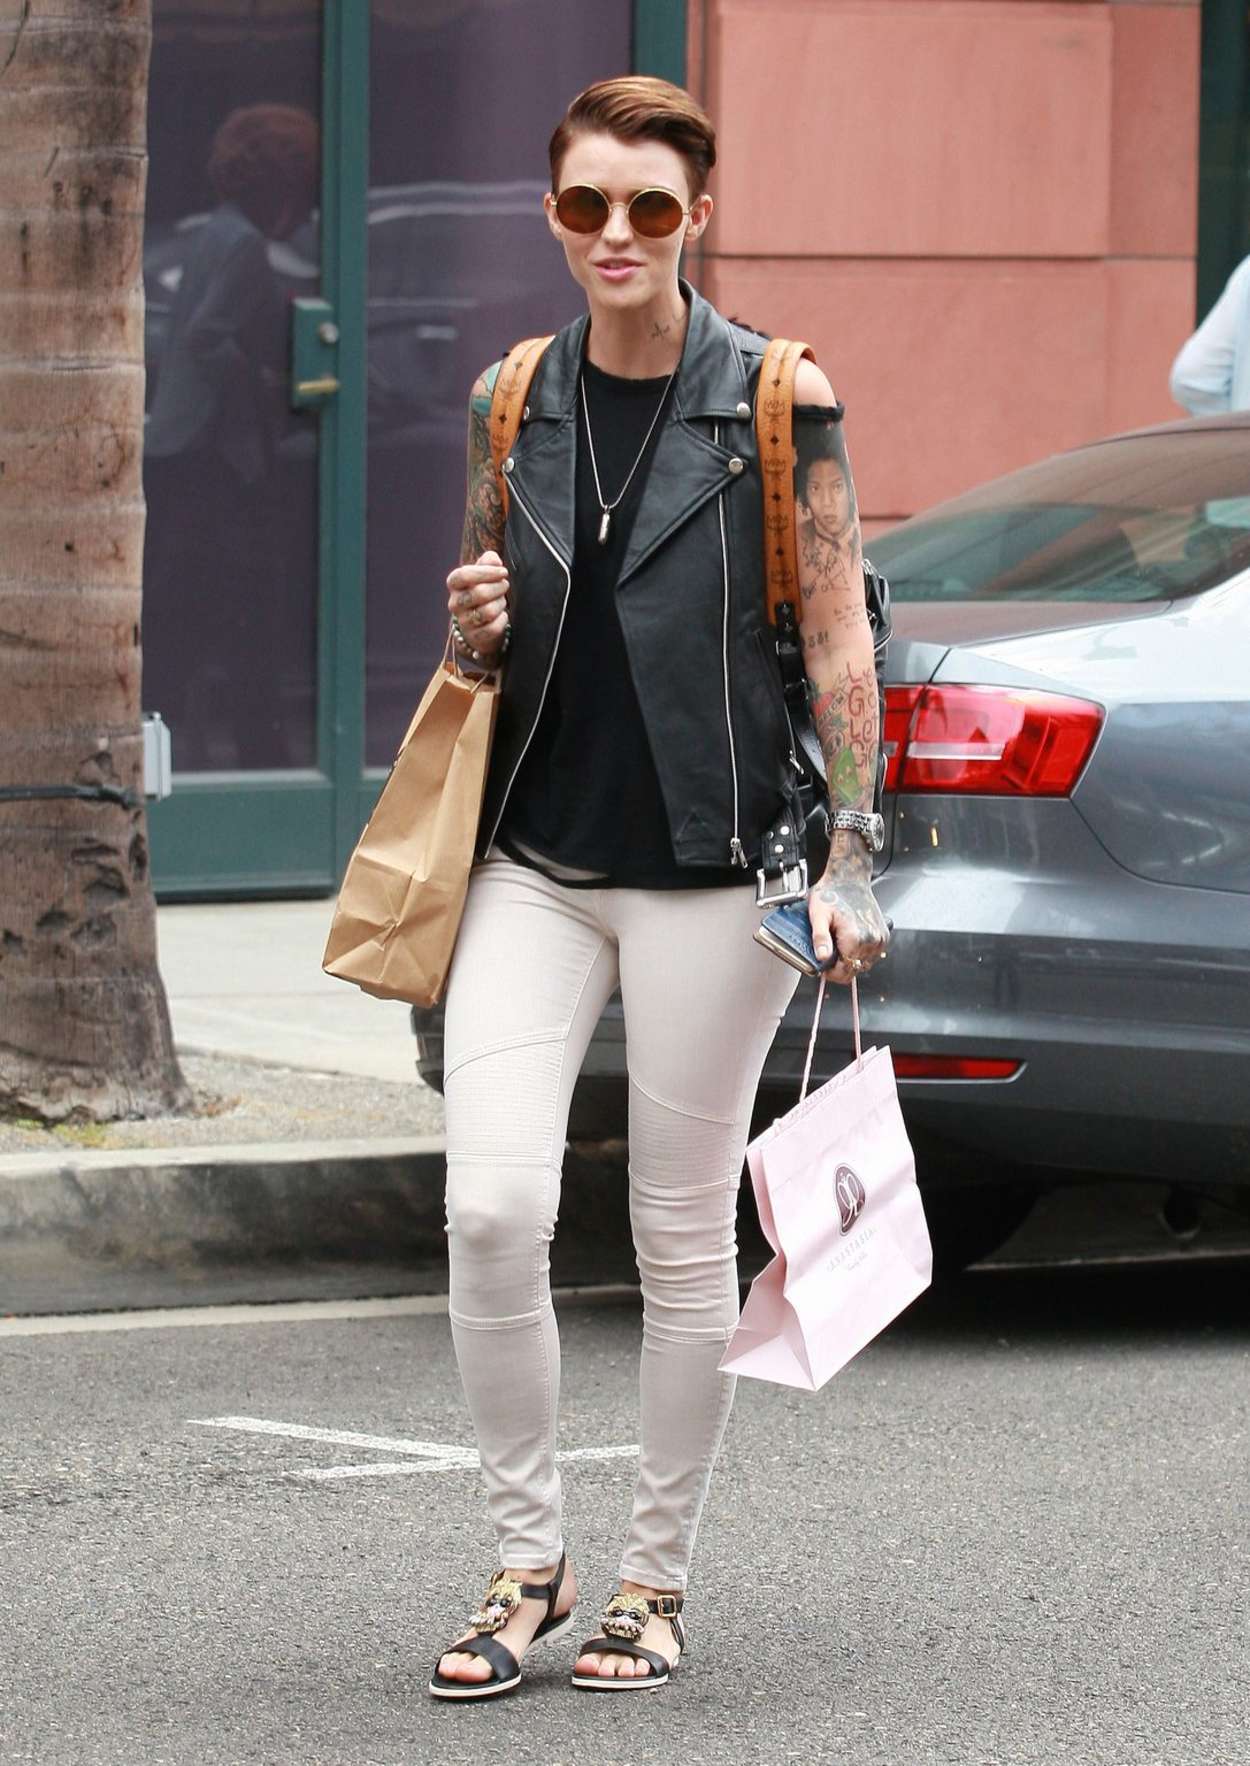 Ruby Rose 2015 : Ruby Rose Booty in Jeans -09. 